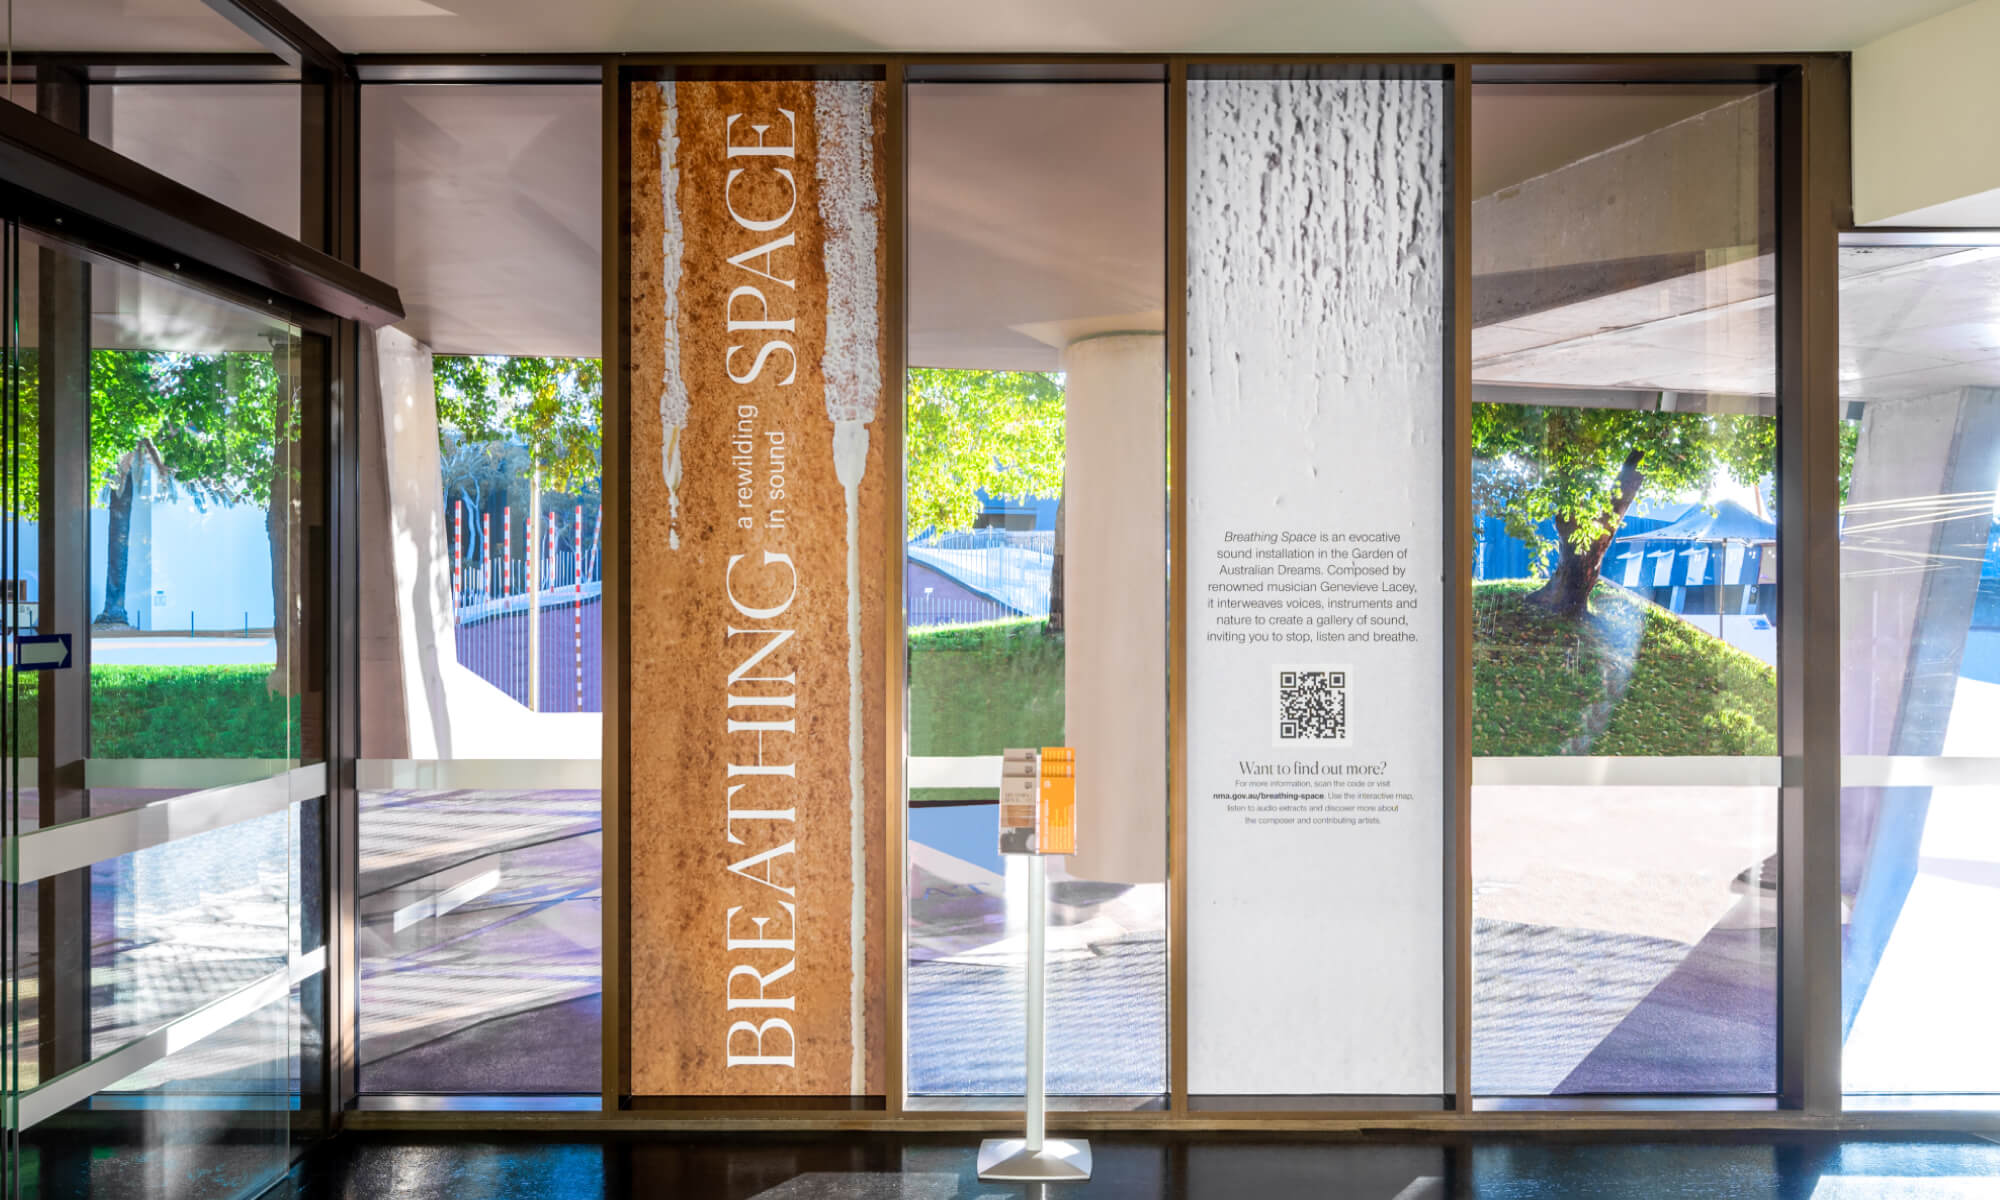 outside poster signage of Breathing Space in the National museum of australia